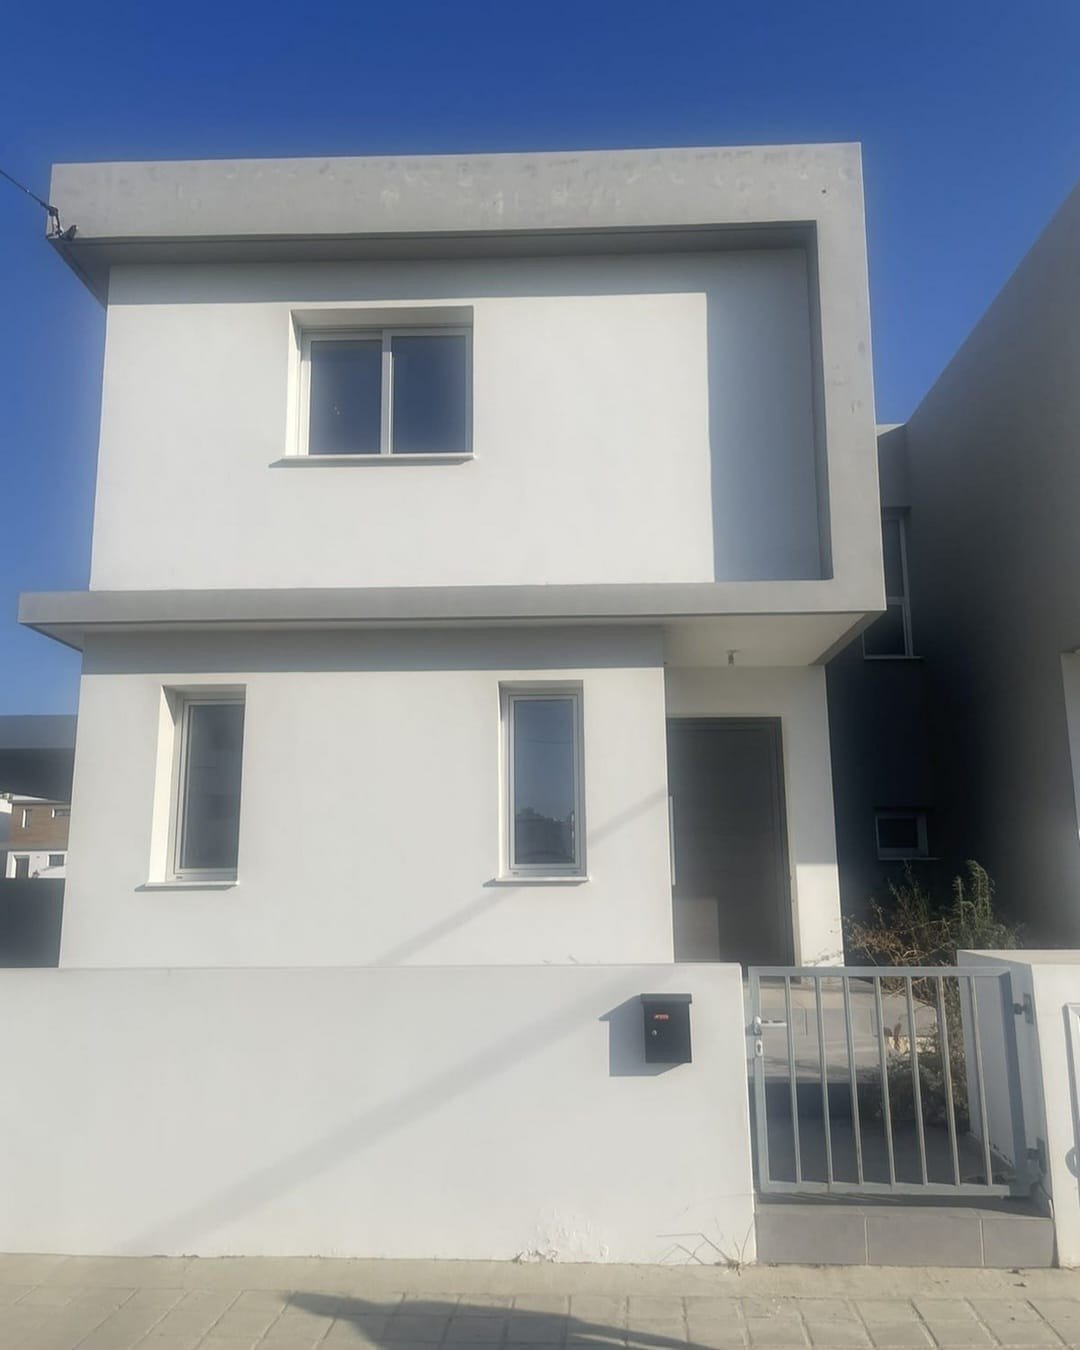 Property for Rent: House (Detached) in Dali, Nicosia for Rent | Key Realtor Cyprus